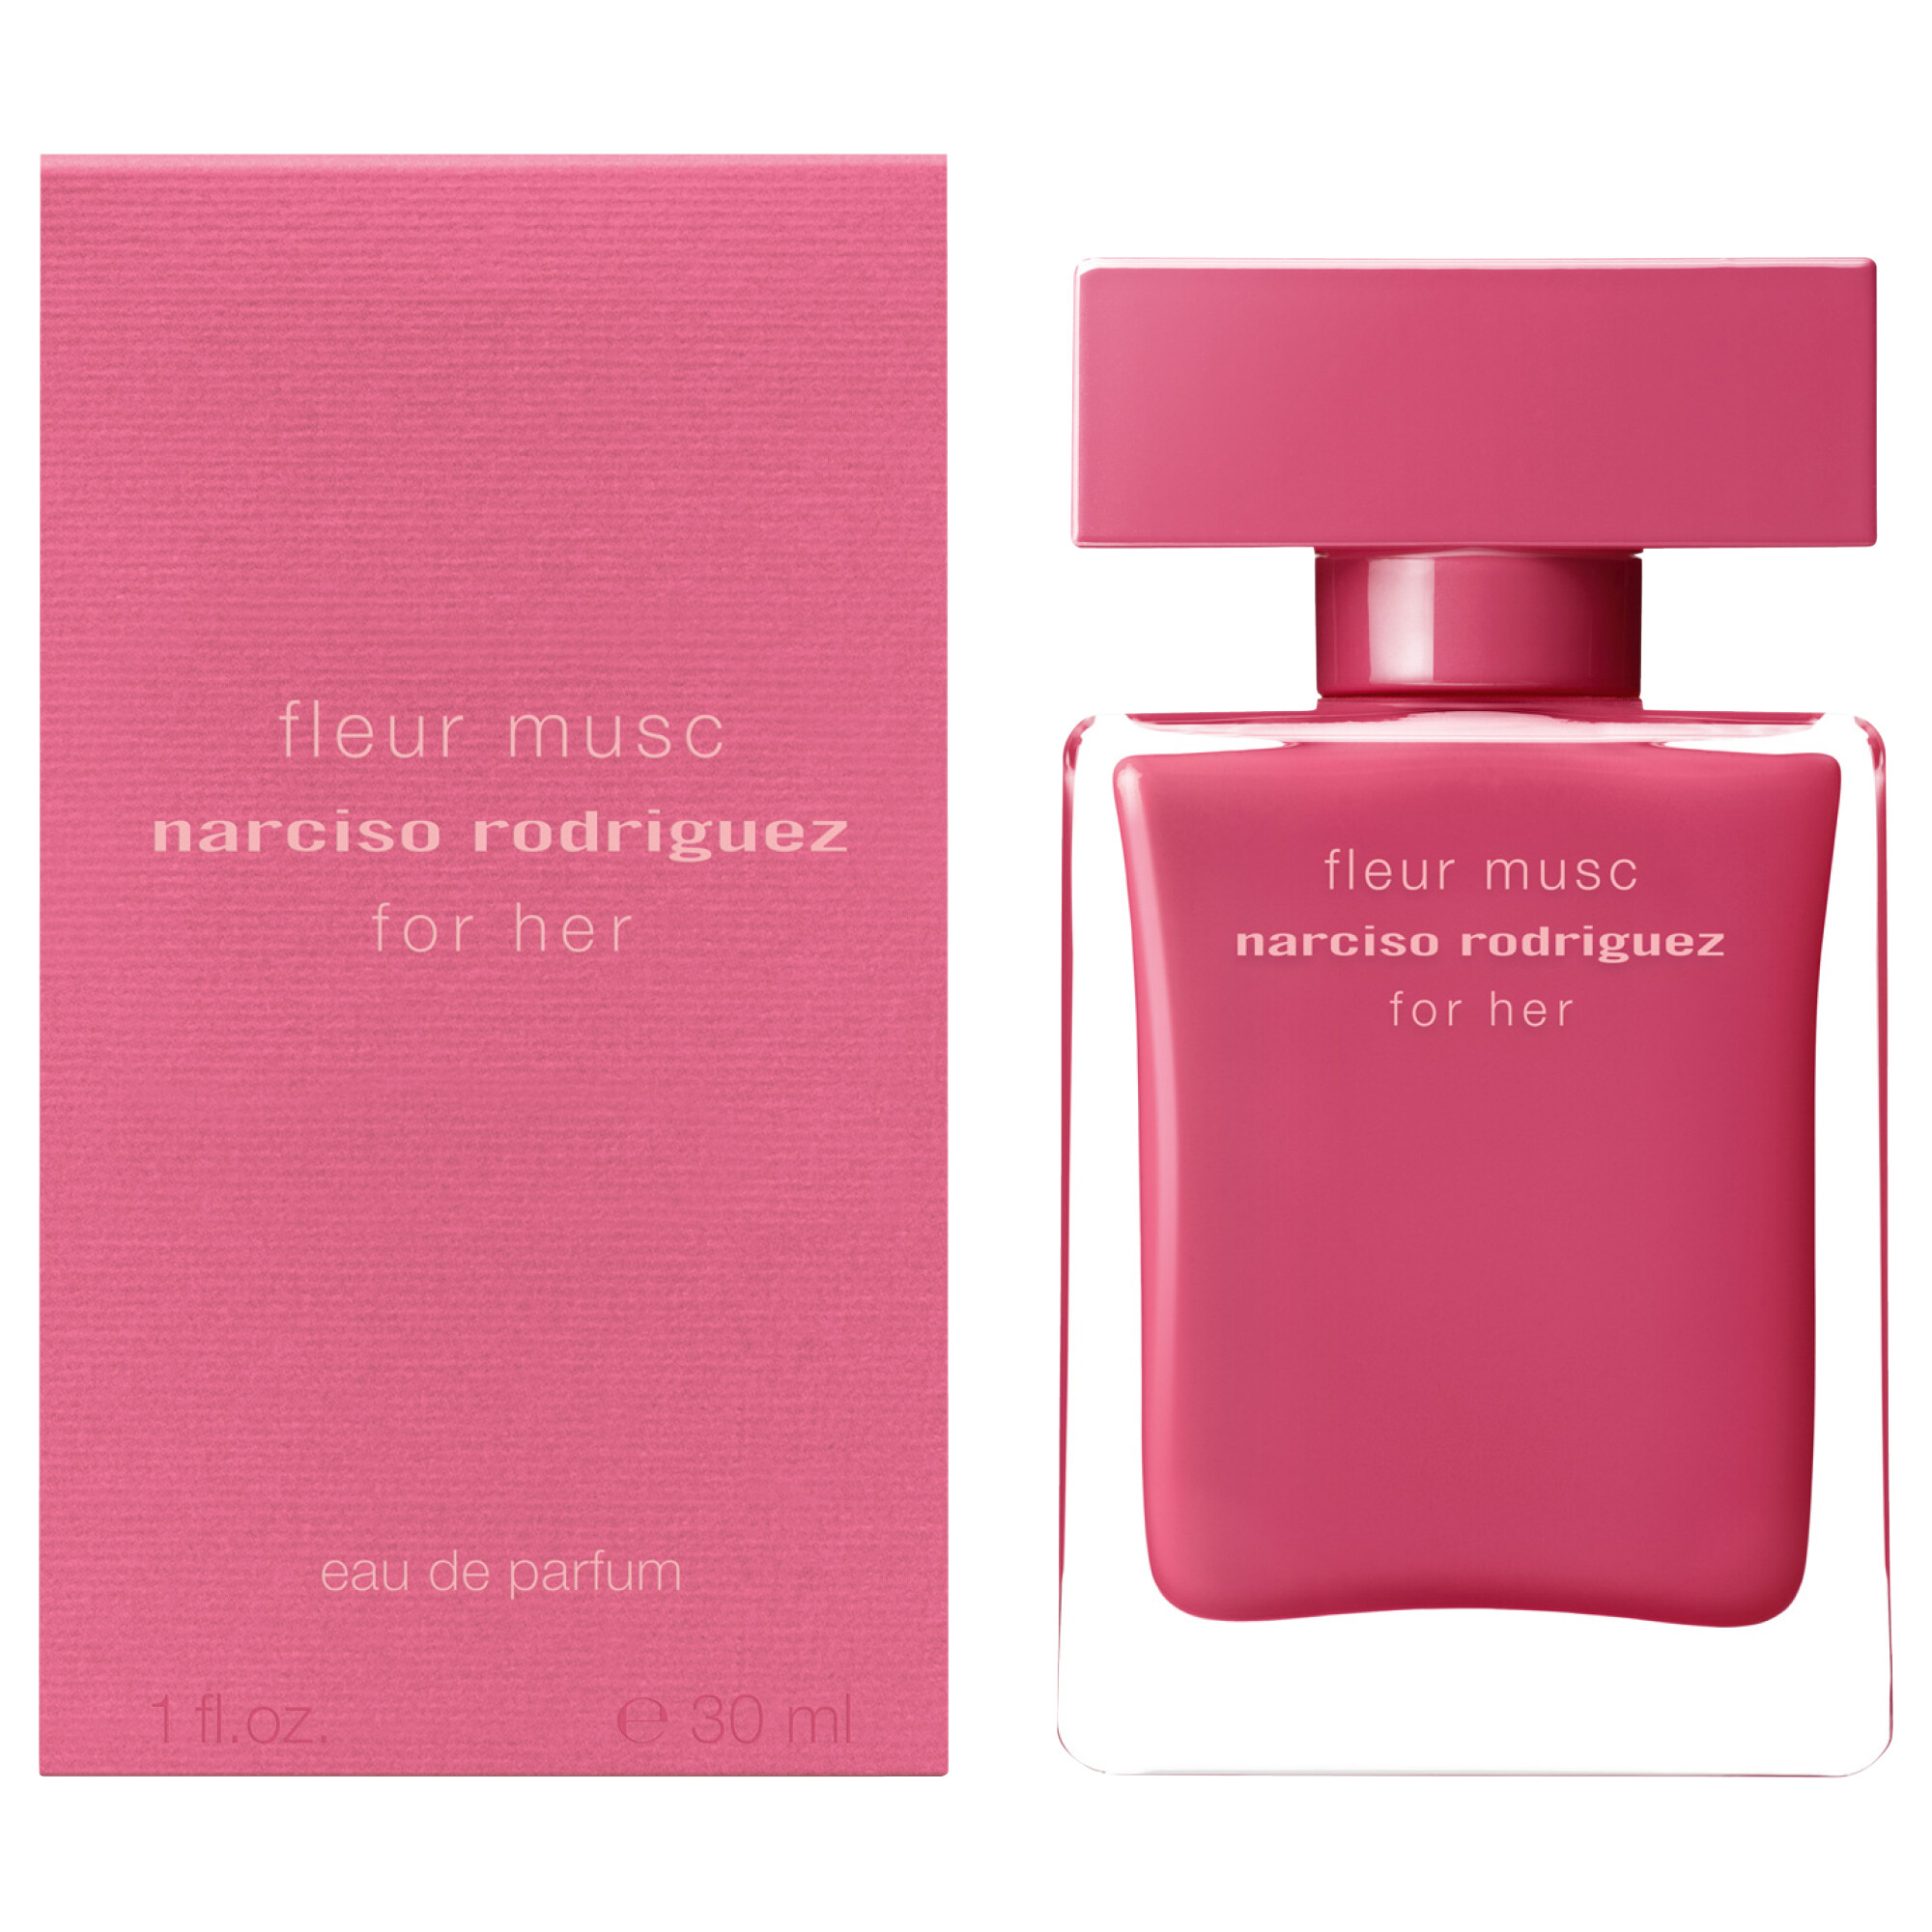 Парфюм narciso rodriguez. Narciso Rodriguez for her fleur Musc парфюмерная вода 100 мл. Narciso Rodriguez for her EDP 100ml. Fleur Musc Narciso Rodriguez for her. Narciso Rodriguez for her Eau de Parfum.